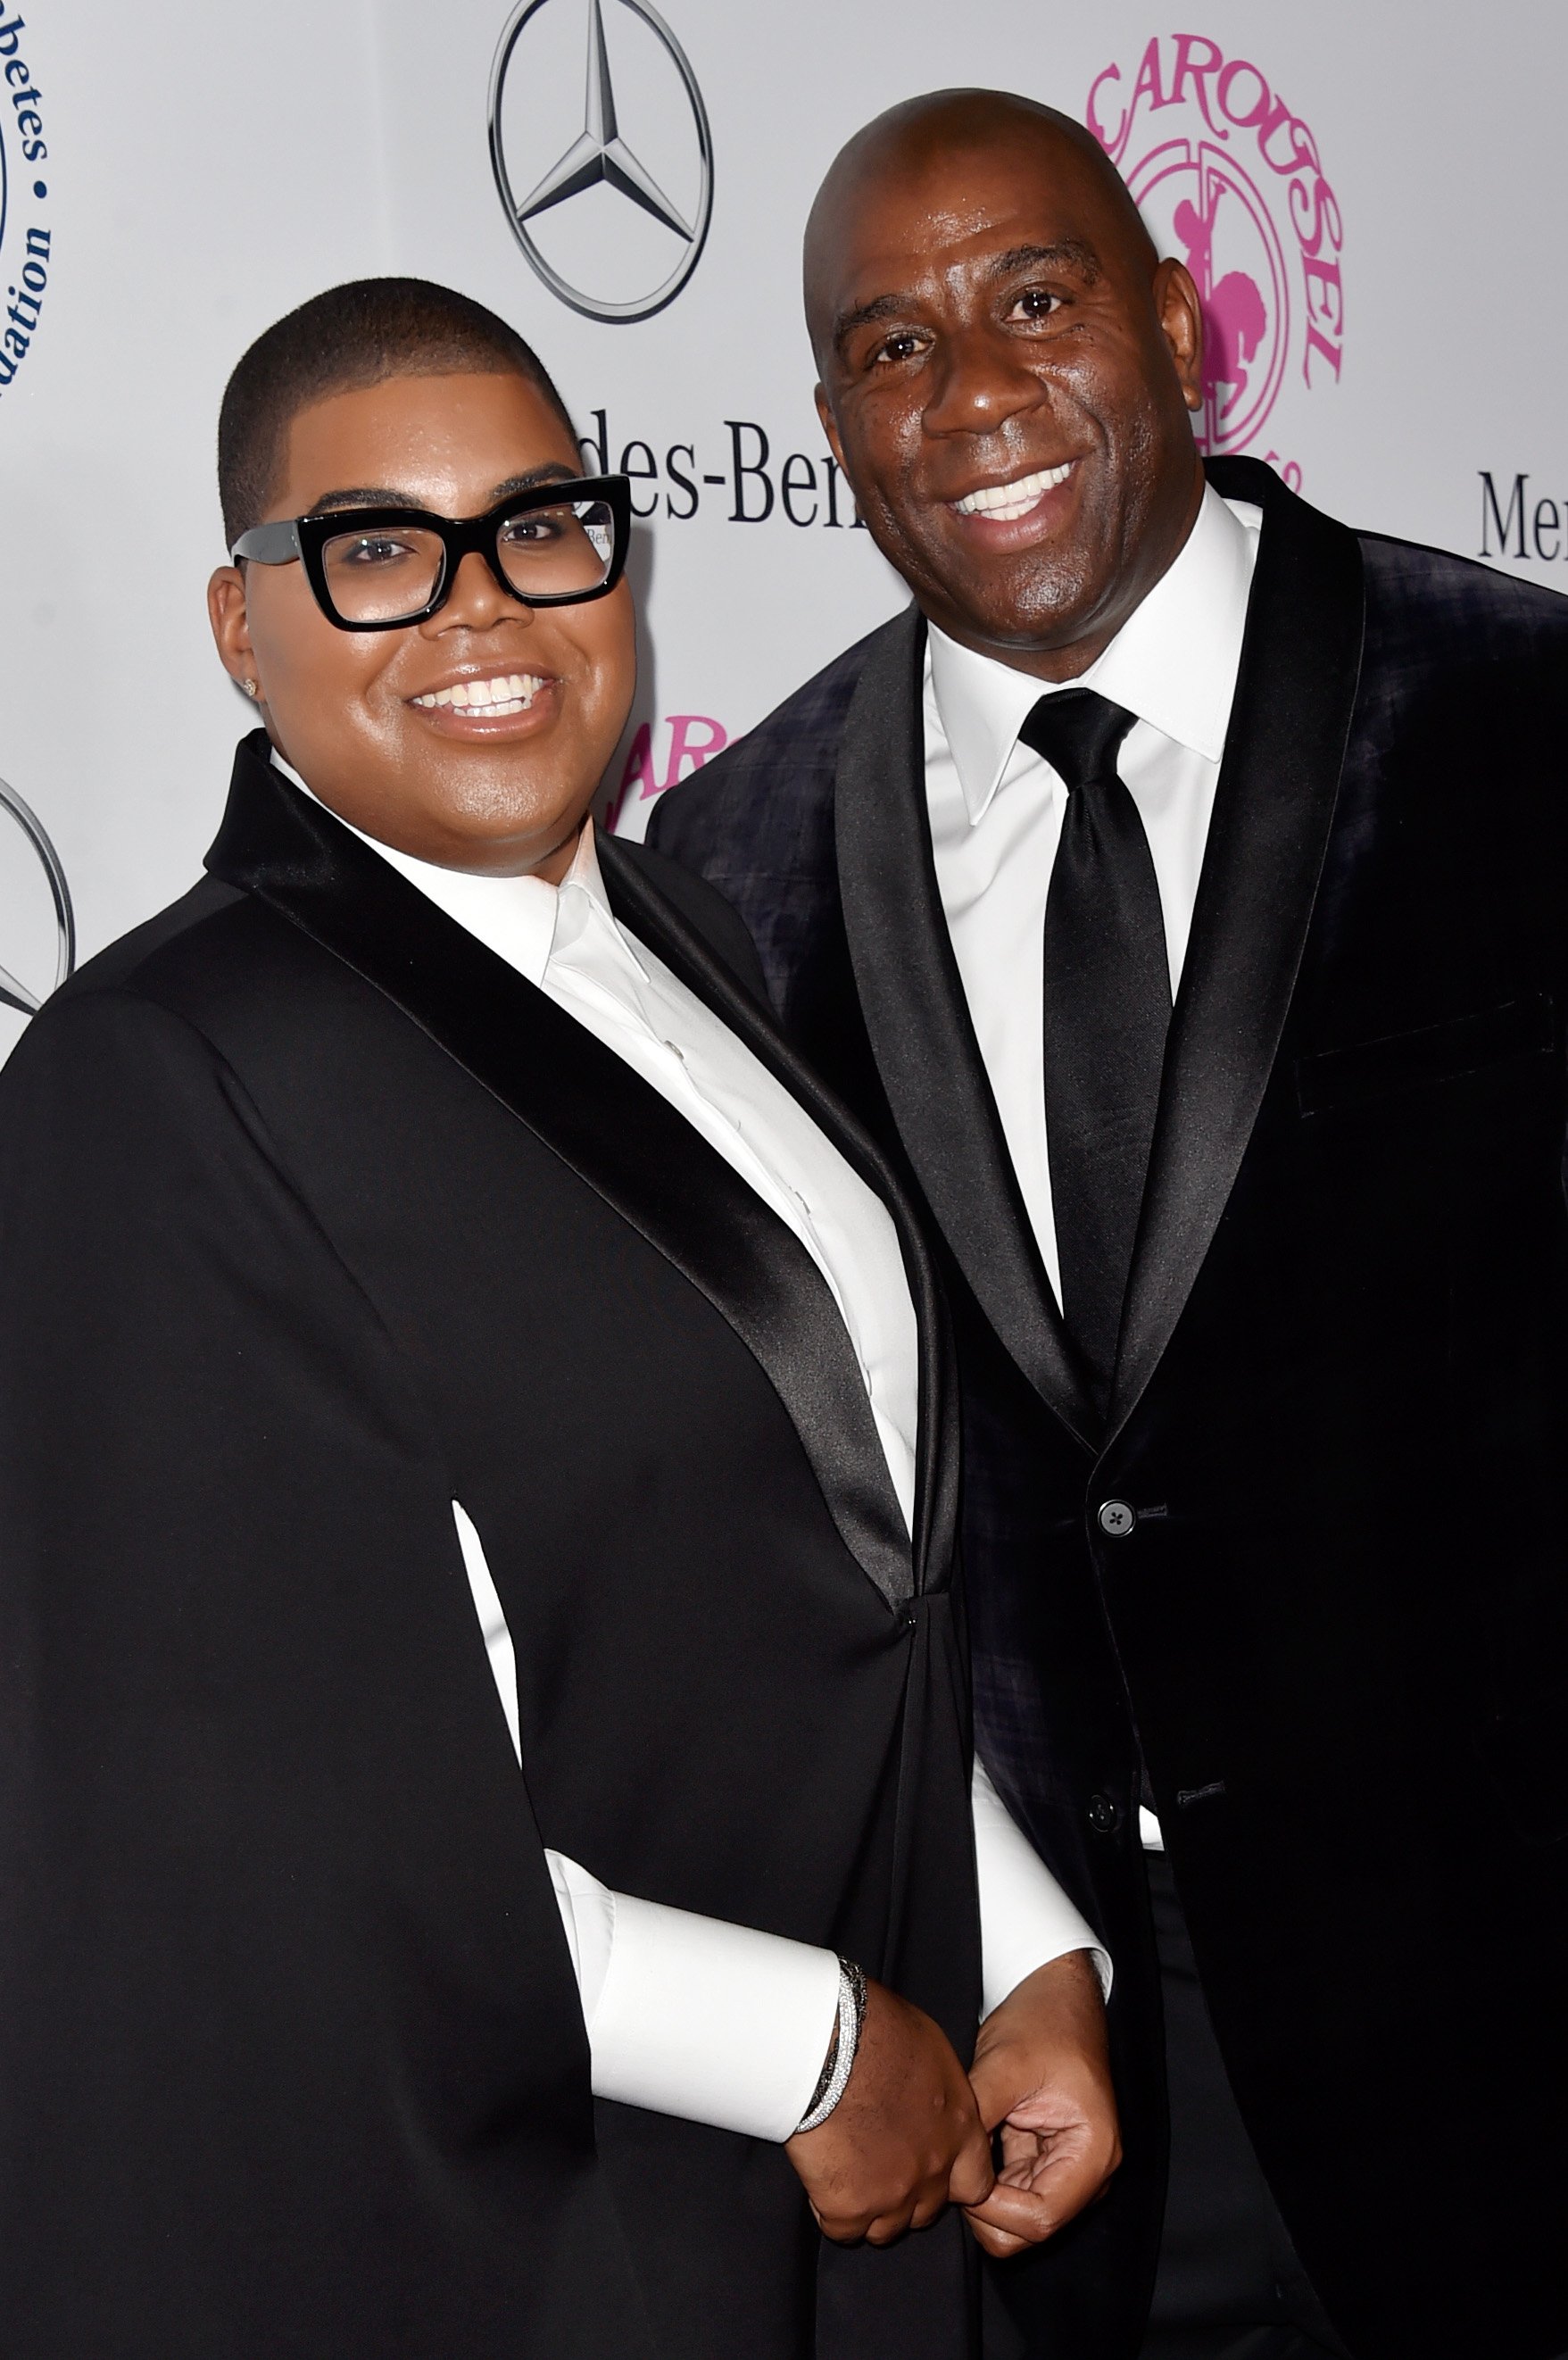 EJ Johnson & Magic Johnson at the 2014 Carousel of Hope Ball in Beverly Hills, California on Oct. 11, 2014 | Photo: Getty Images